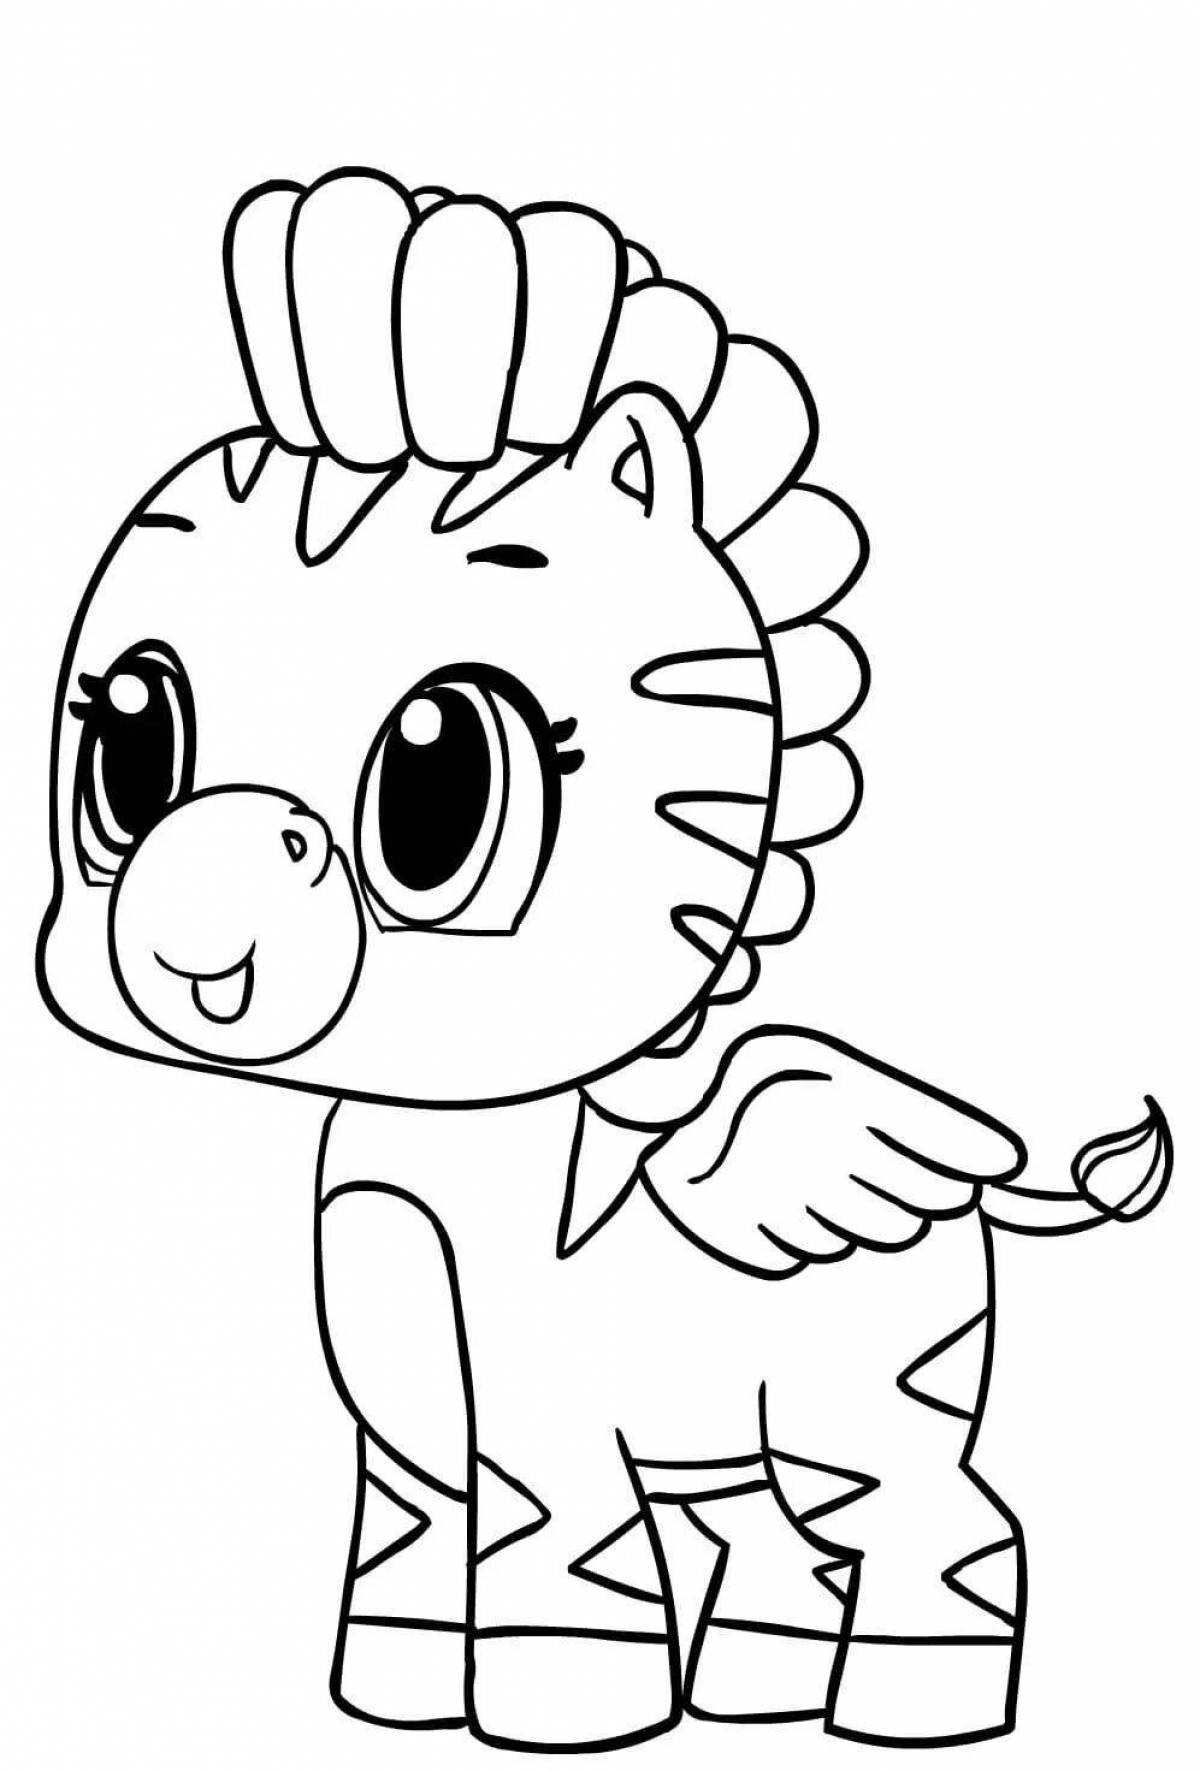 Fancy hechimola coloring page